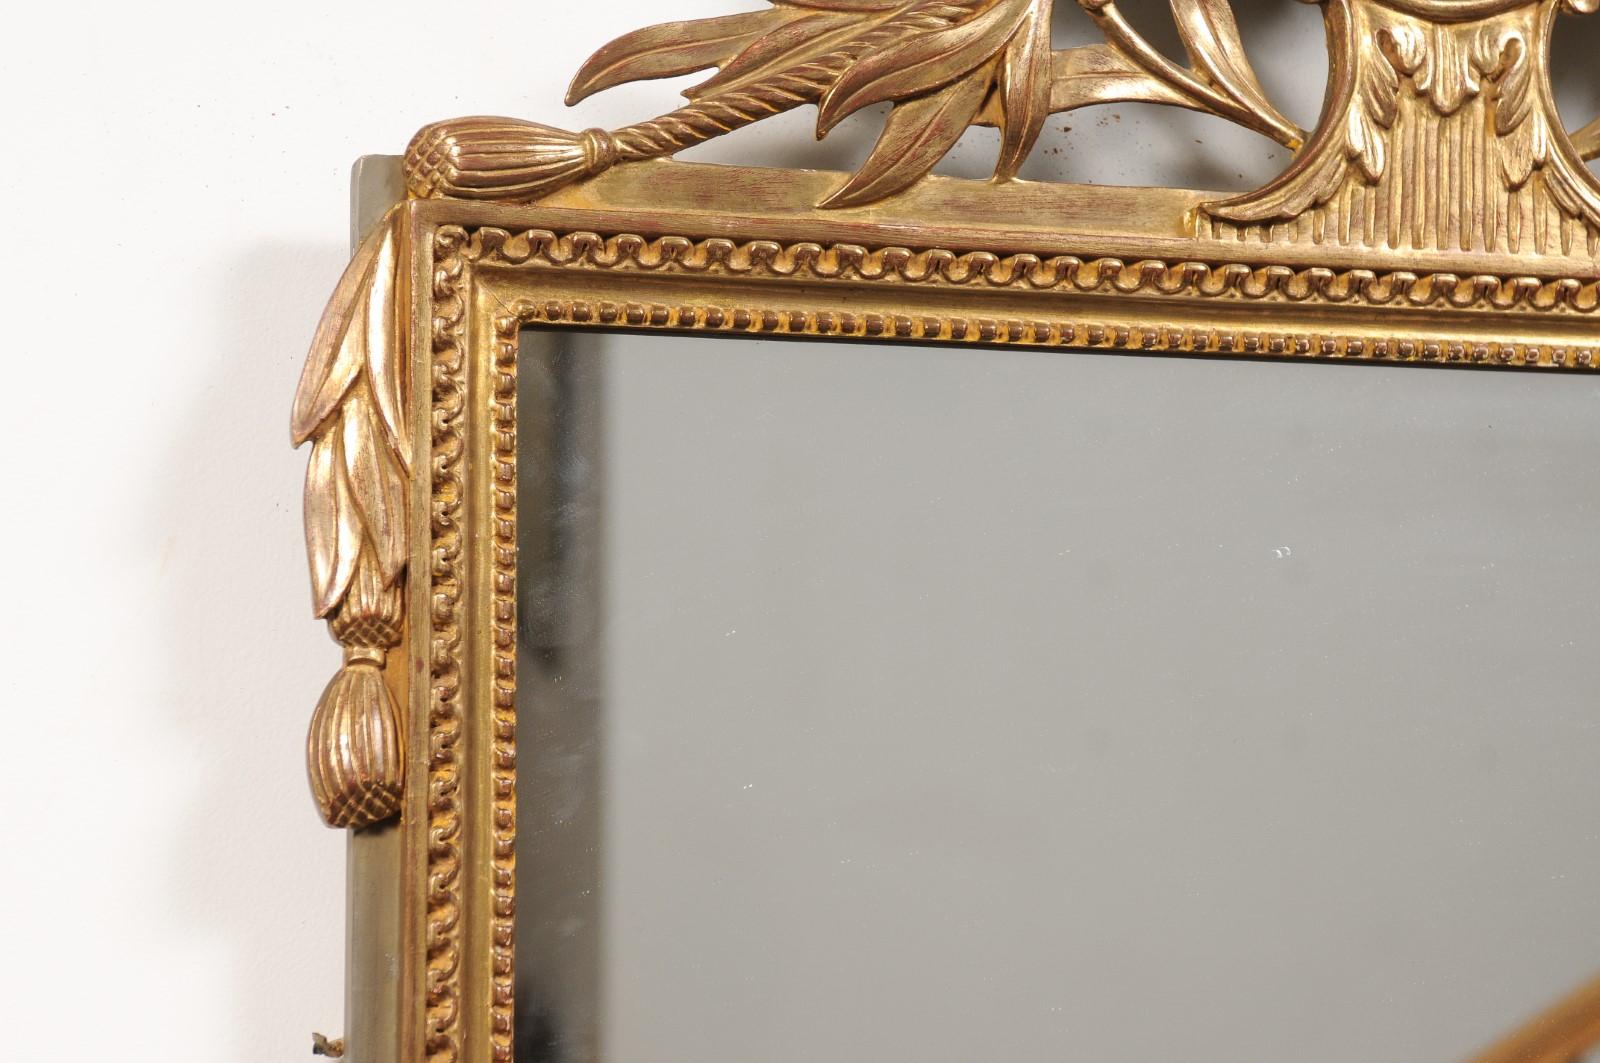 Louis XVI Style Gilt Wood Mirror with Floral Carved Medallion Crest and Tassels For Sale 6